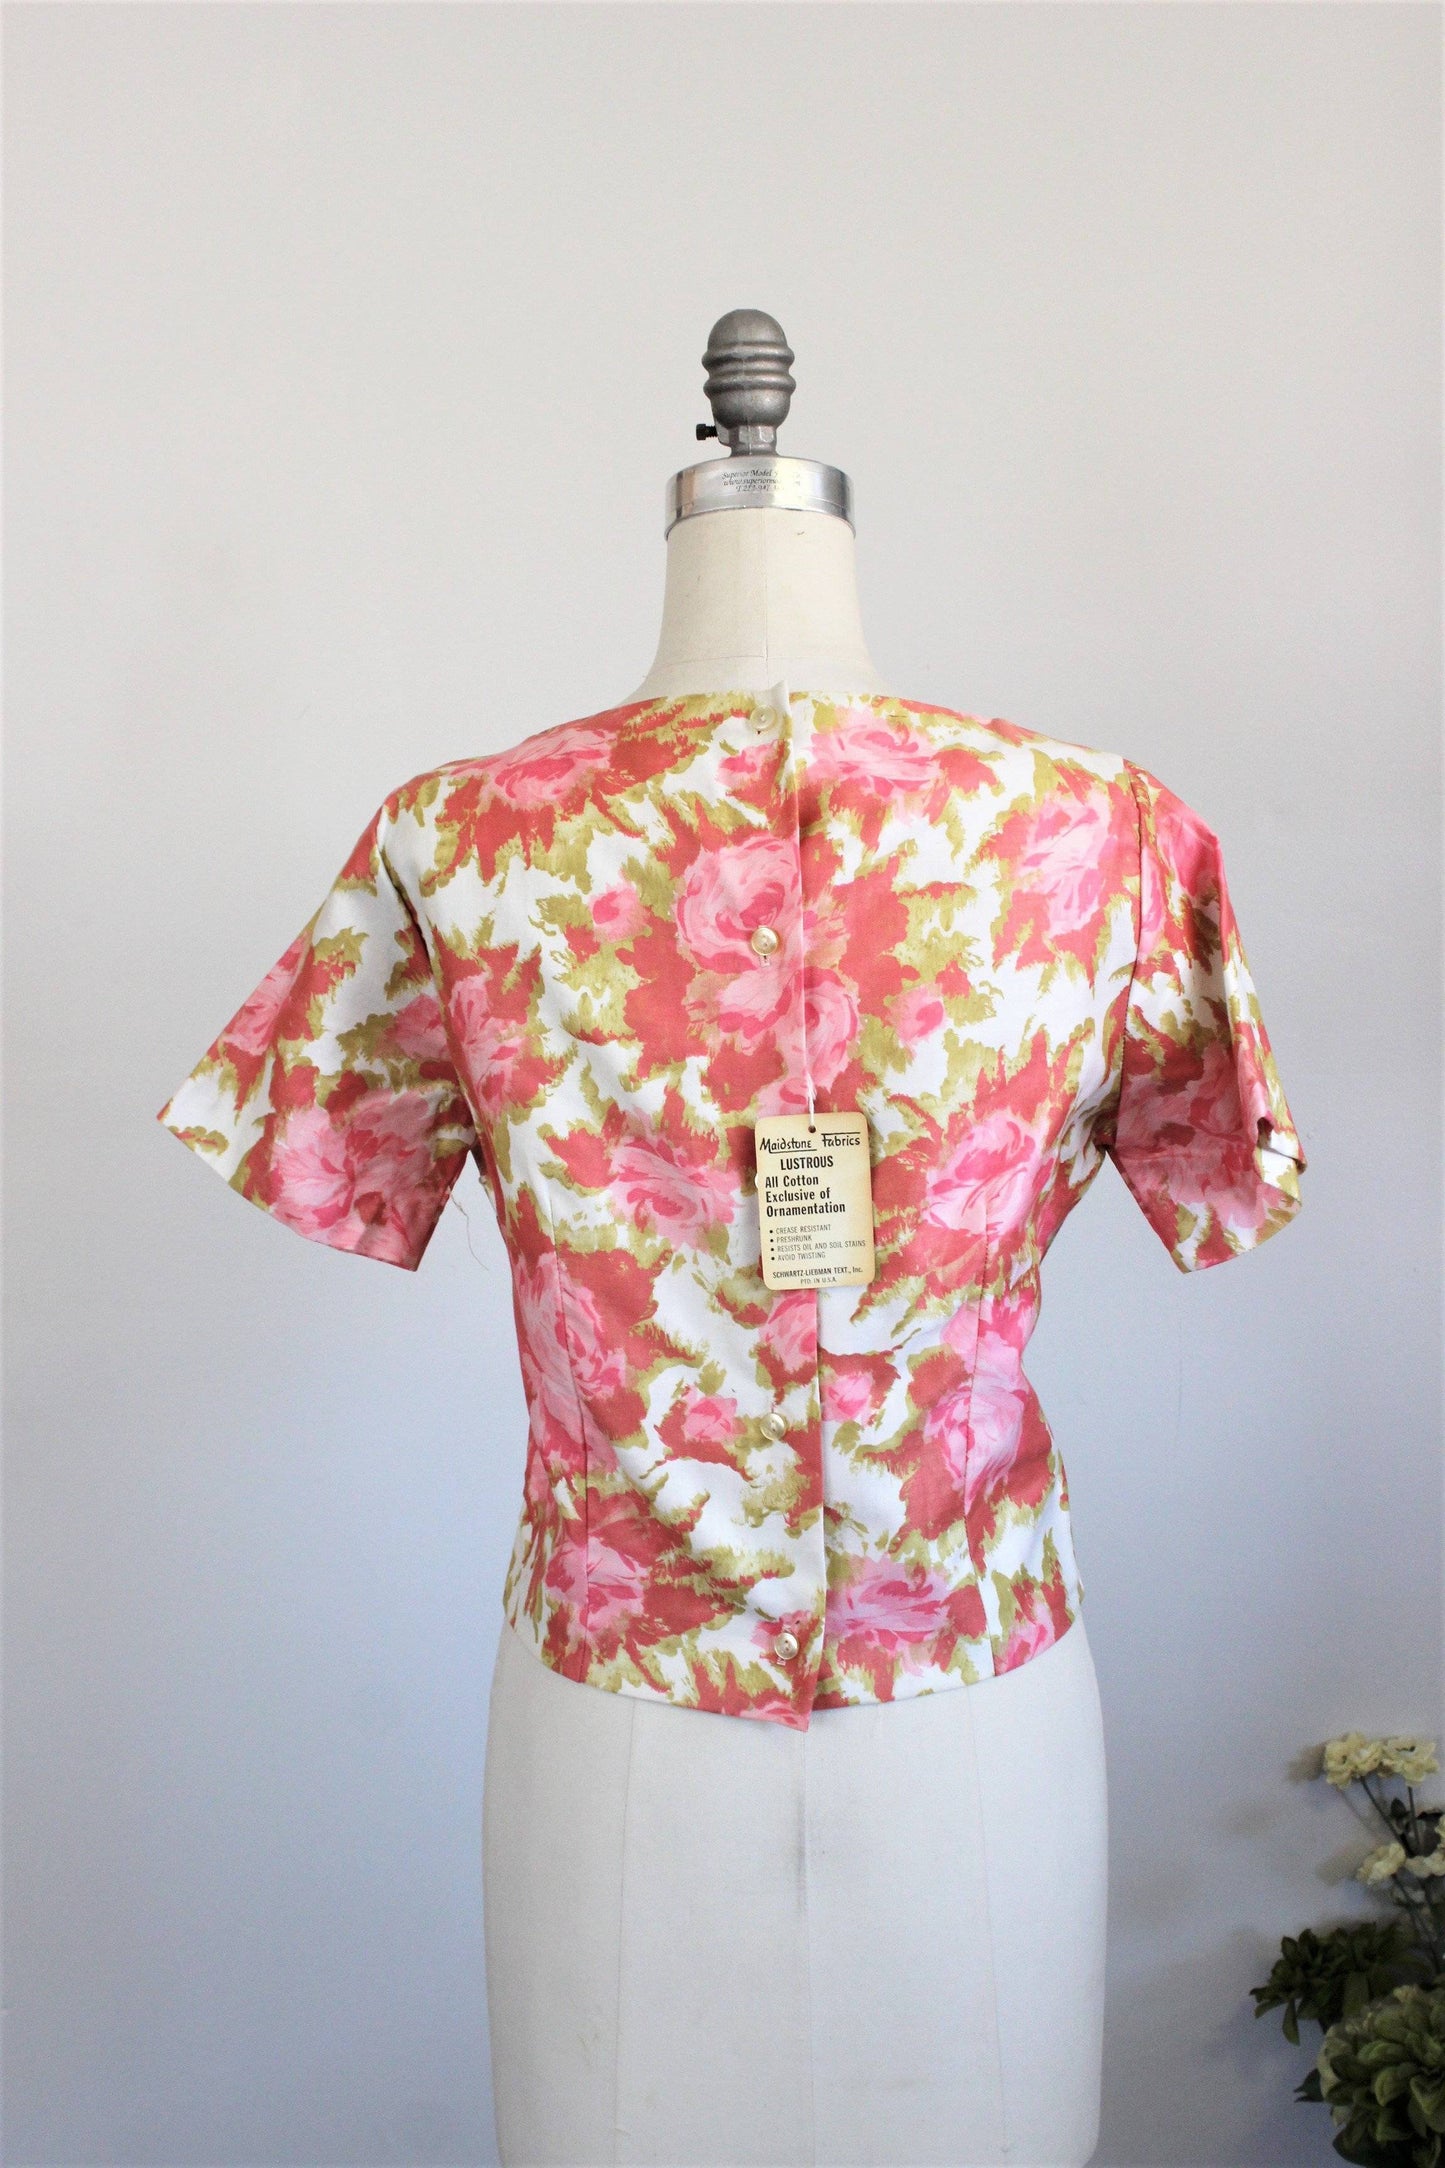 Vintage 1960s Miss Marcy of California Top, New With Tags-Toadstool Farm Vintage-Cropped Top,Floral Print Top,Maidstone Fabrics,Miss Marcy of California,New With tags,NWT Vintage,Vintage,Vintage Clothing,Vintage Top